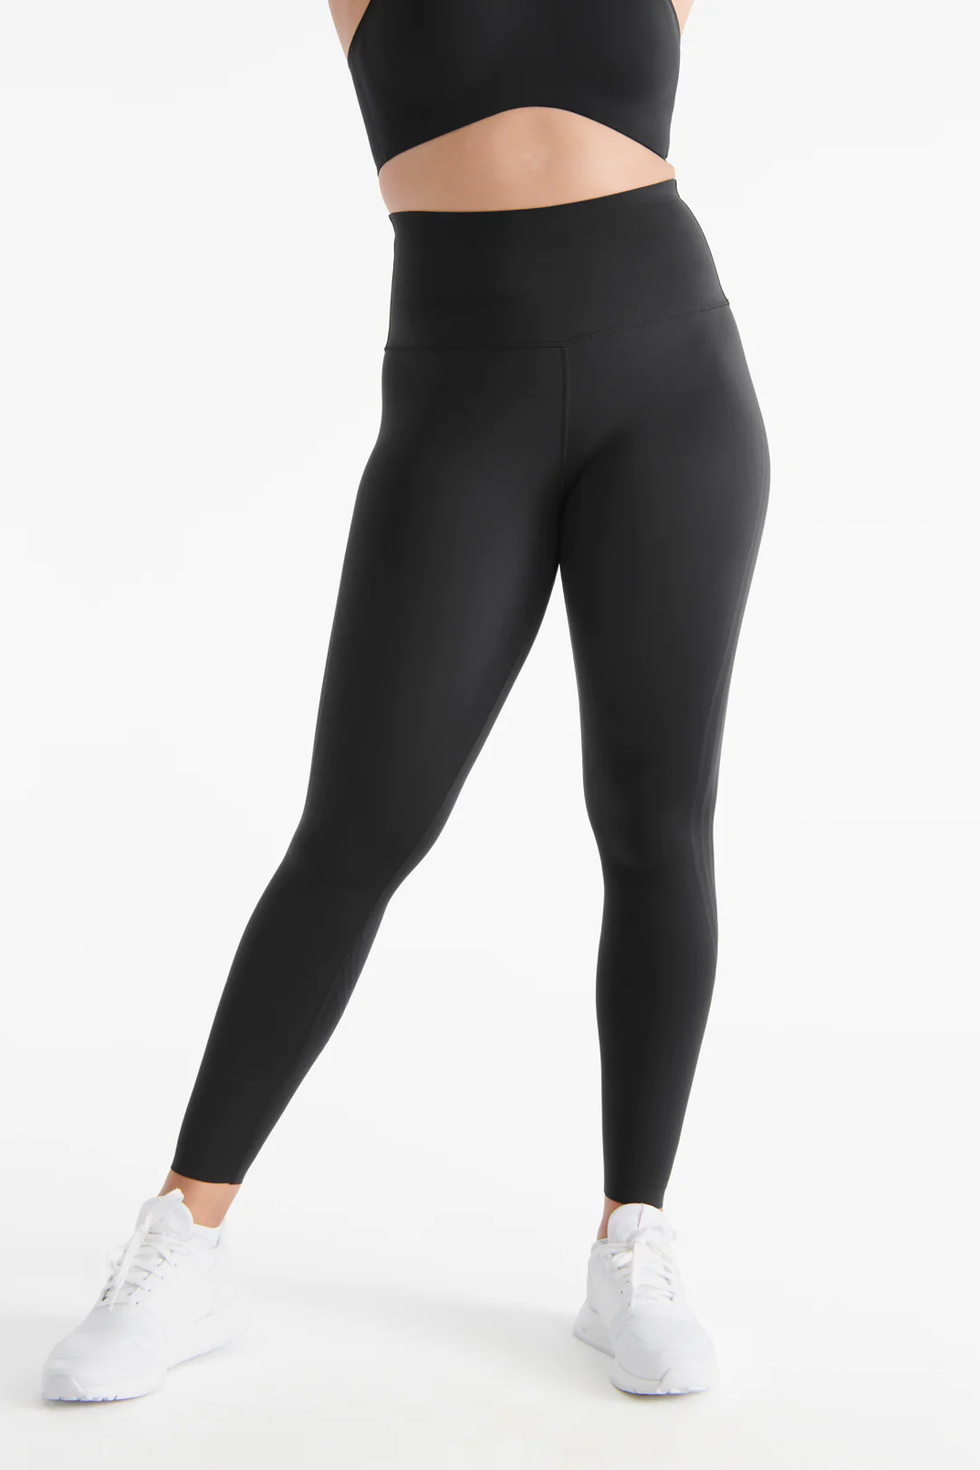 12 Black Leggings That You Can Wear Anywhere and Everywhere - Features 